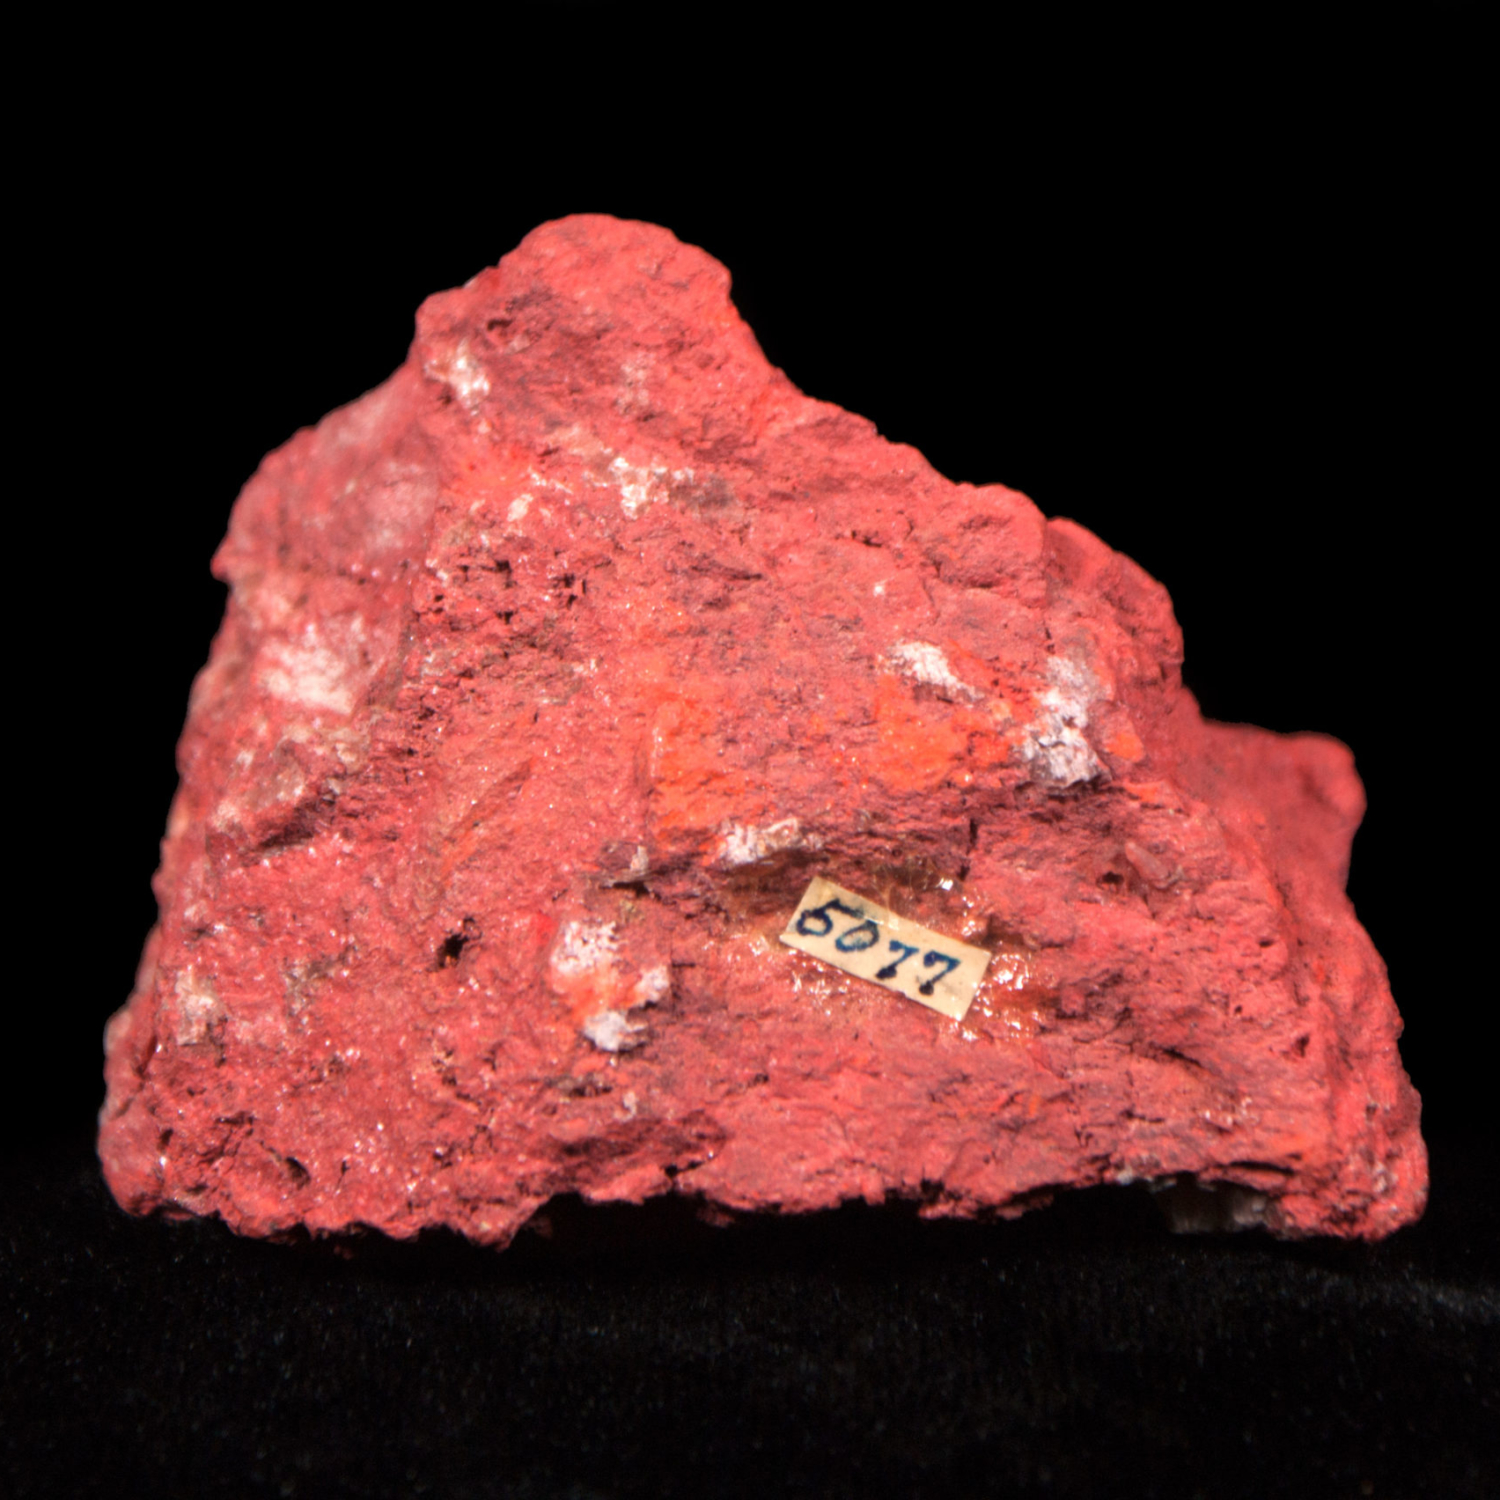 A sample of red cinnabar on a black background.